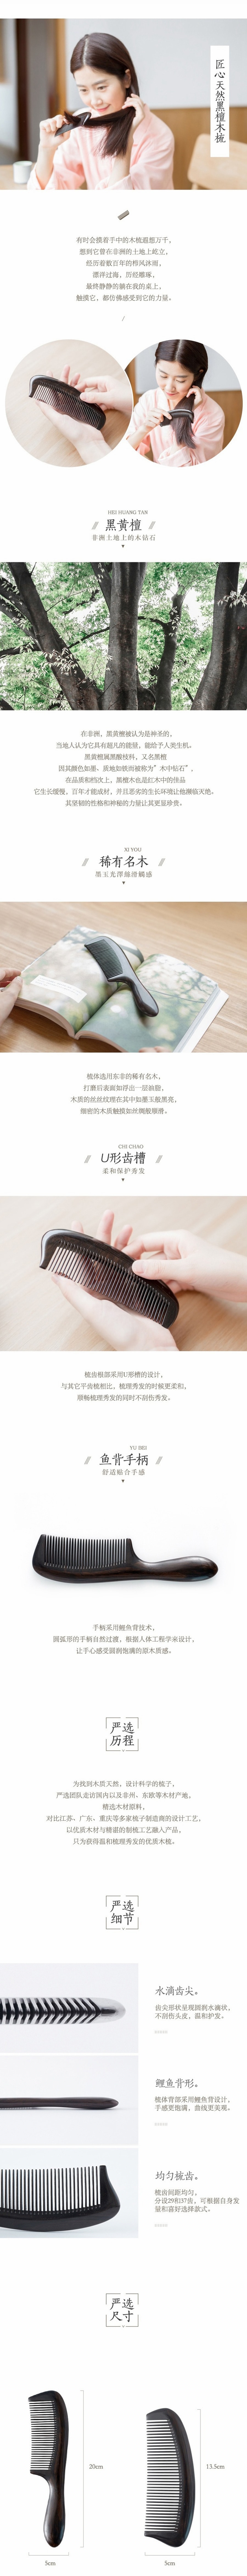 LIFEASE wooden comb